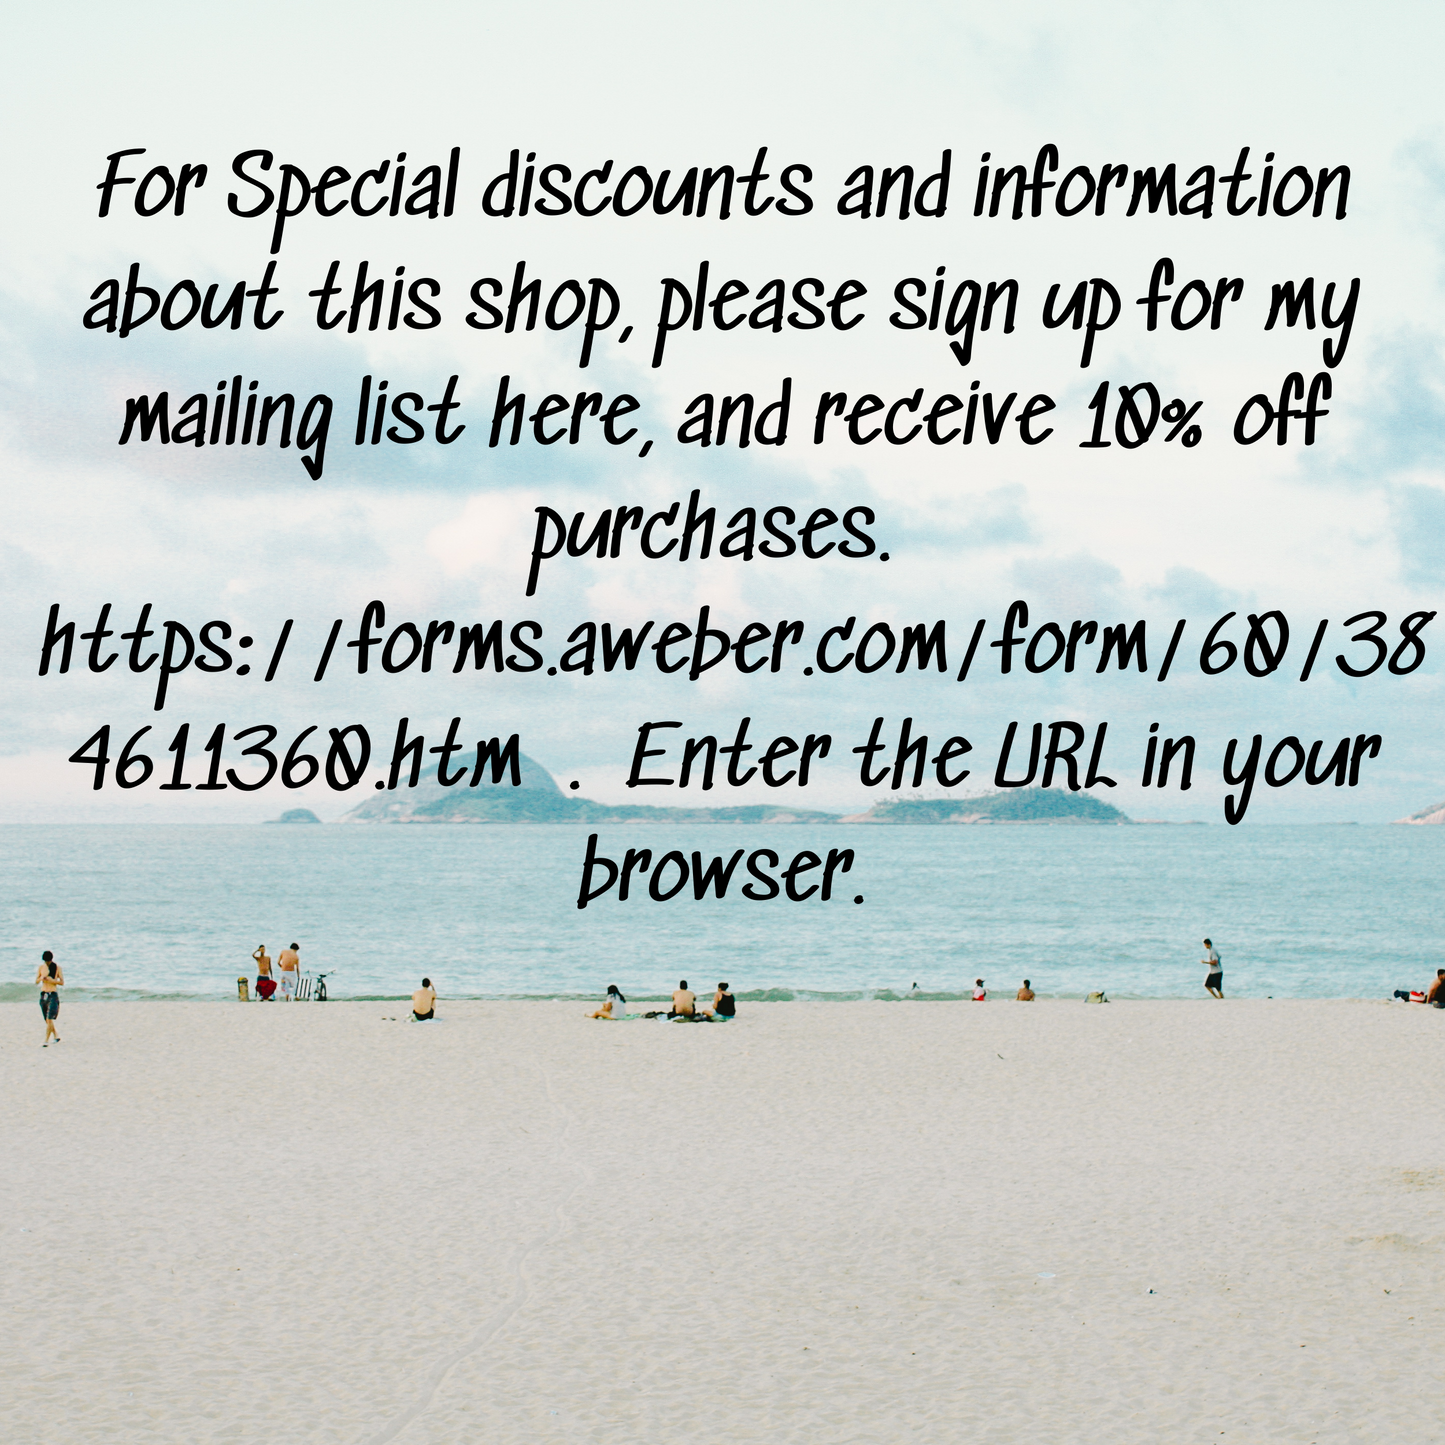 This photo shows and ocean background with information about joining the Treasure Seekers to get information about discounts and what is going on.